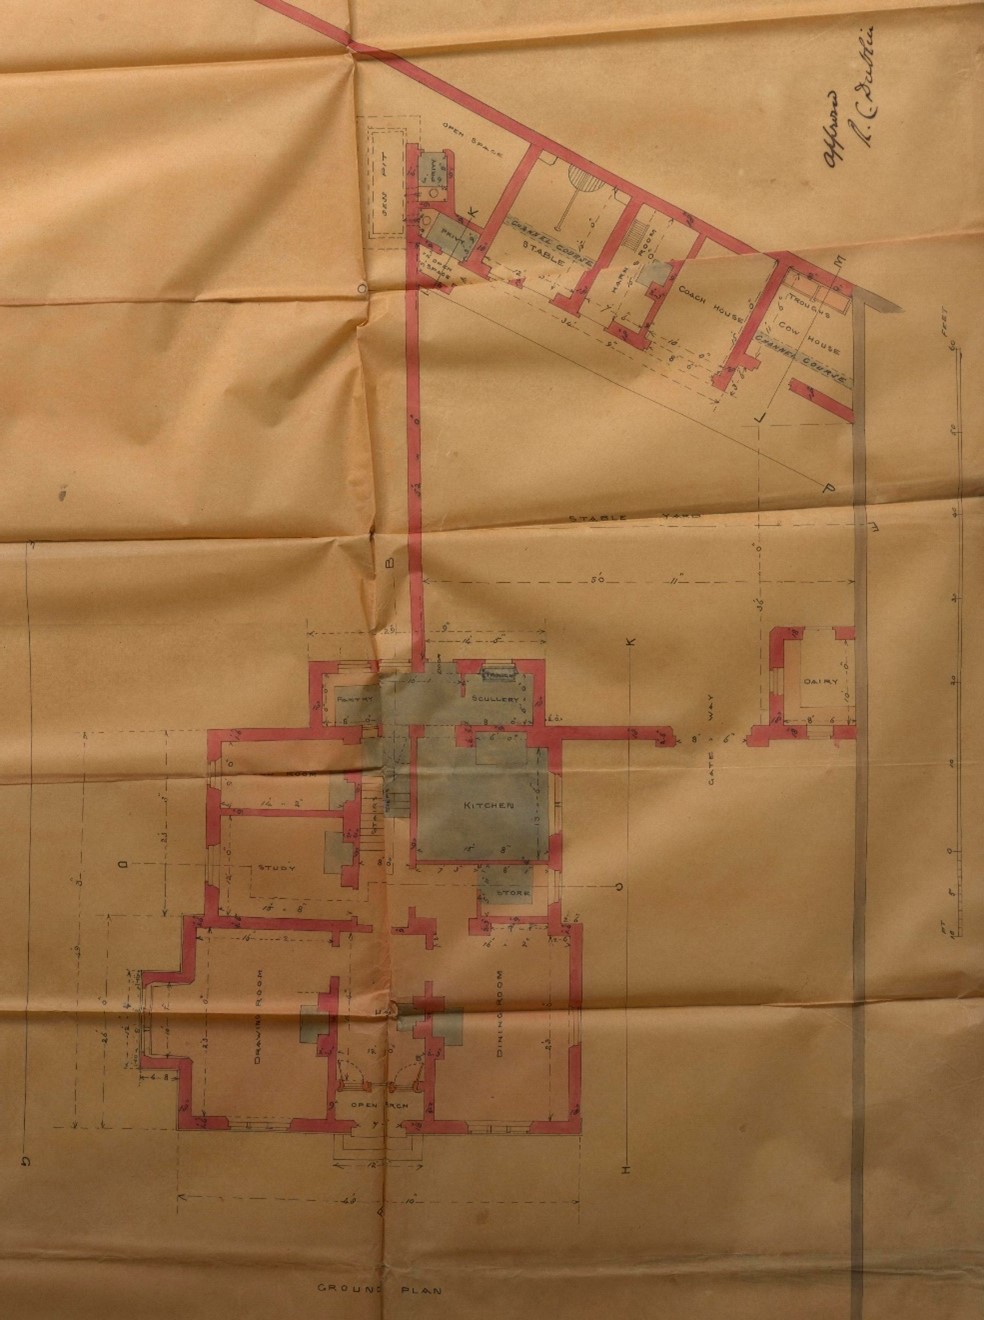 Frederick Darley, “Taney. Glebe House. Second Floor Plan. 7 Bedrooms | Dressing Room Hay Loft | Servants Bed Room. 60ft. Approved RC Dublin,” RCB Library - Architectural Drawings, accessed April 4, 2023, https://archdrawing.ireland.anglican.org/items/show/9754.